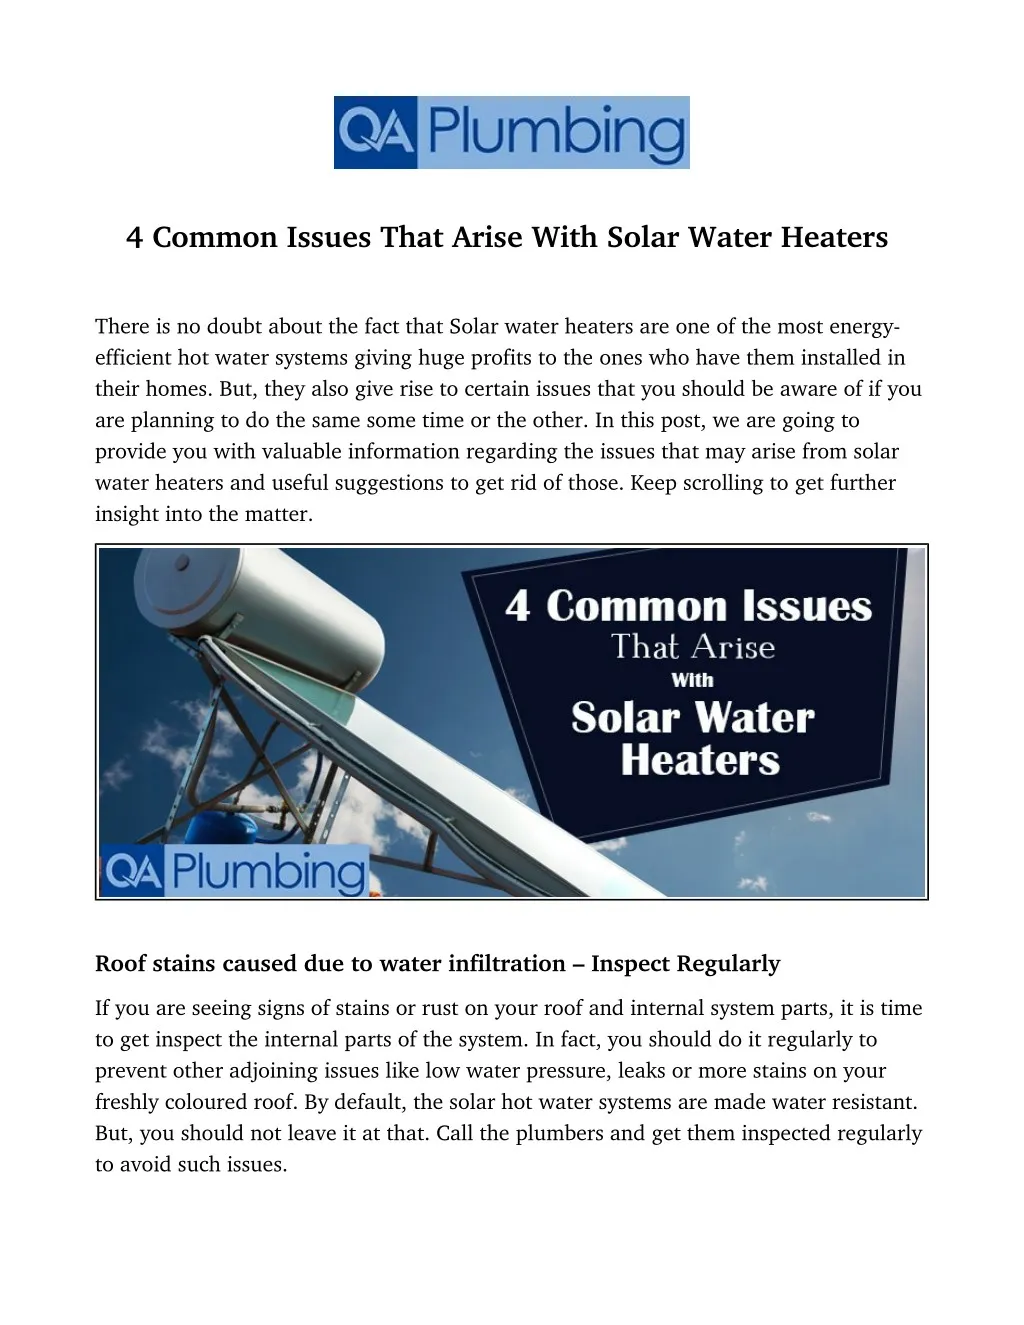 4 common issues that arise with solar water